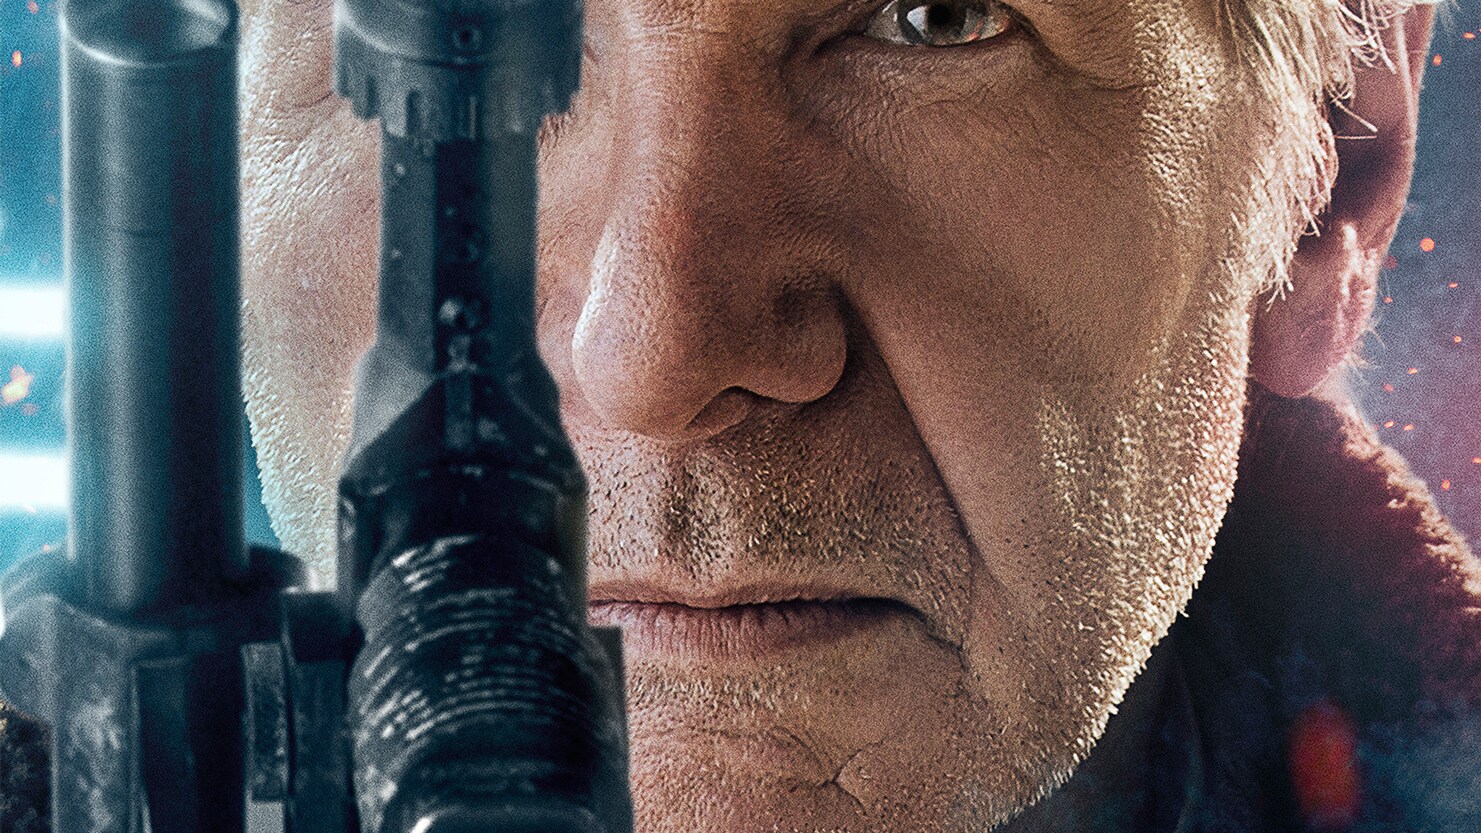 Han Solo - Star Wars: The Force Awakens Character Poster